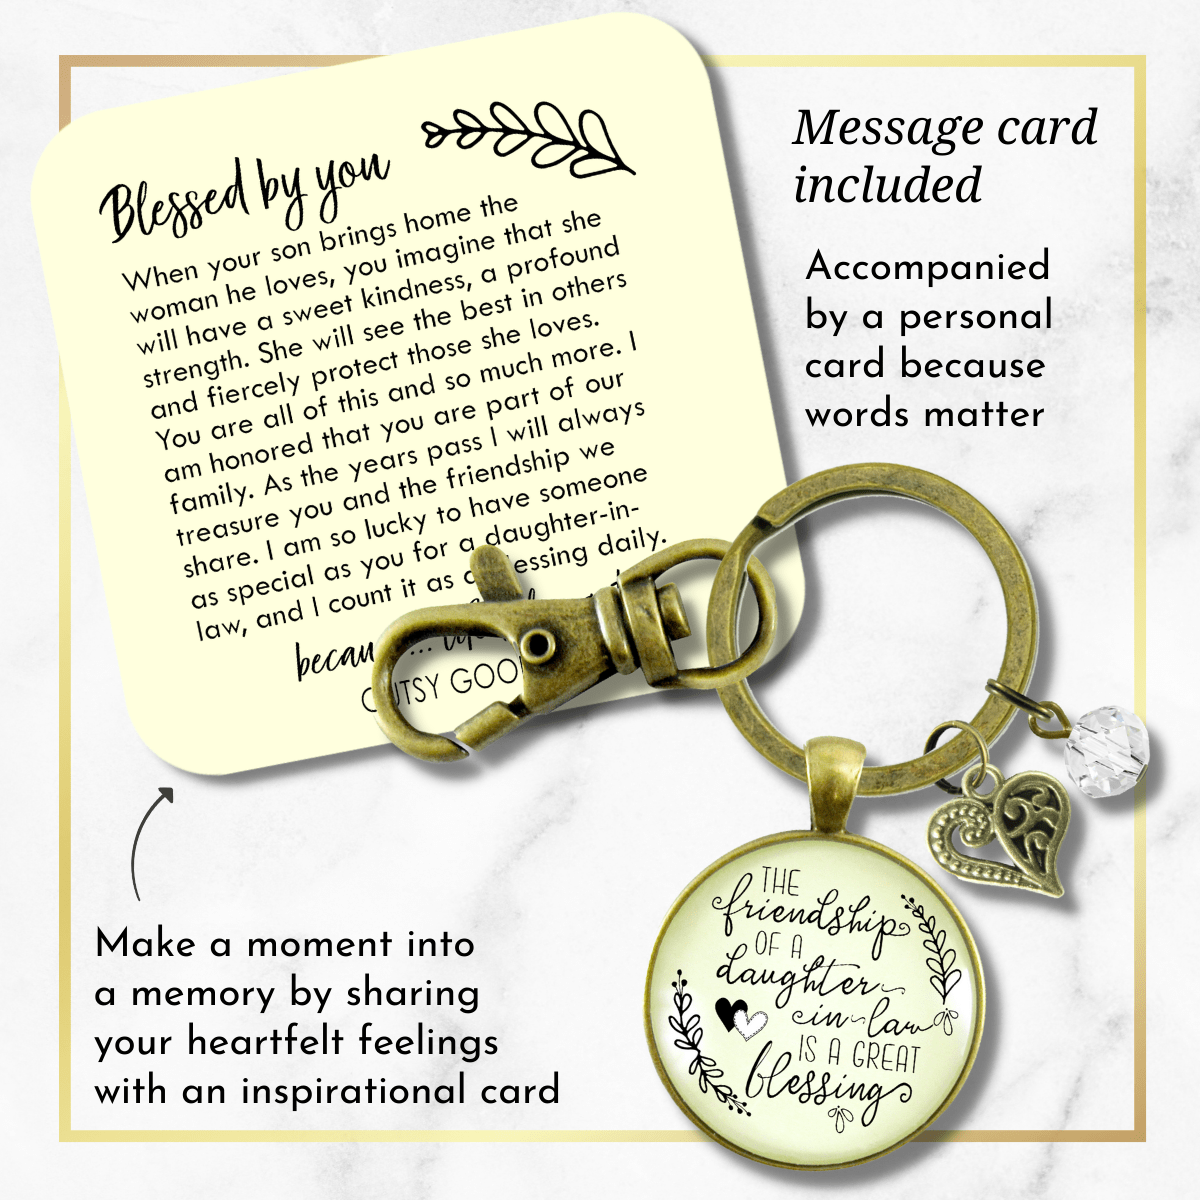 Daughter In Law Keychain Friendship Is A Great Blessing Gift From Mom Special Wedding Jewelry Heart - Gutsy Goodness Handmade Jewelry;Daughter In Law Keychain Friendship Is A Great Blessing Gift From Mom Special Wedding Jewelry Heart - Gutsy Goodness Handmade Jewelry Gifts